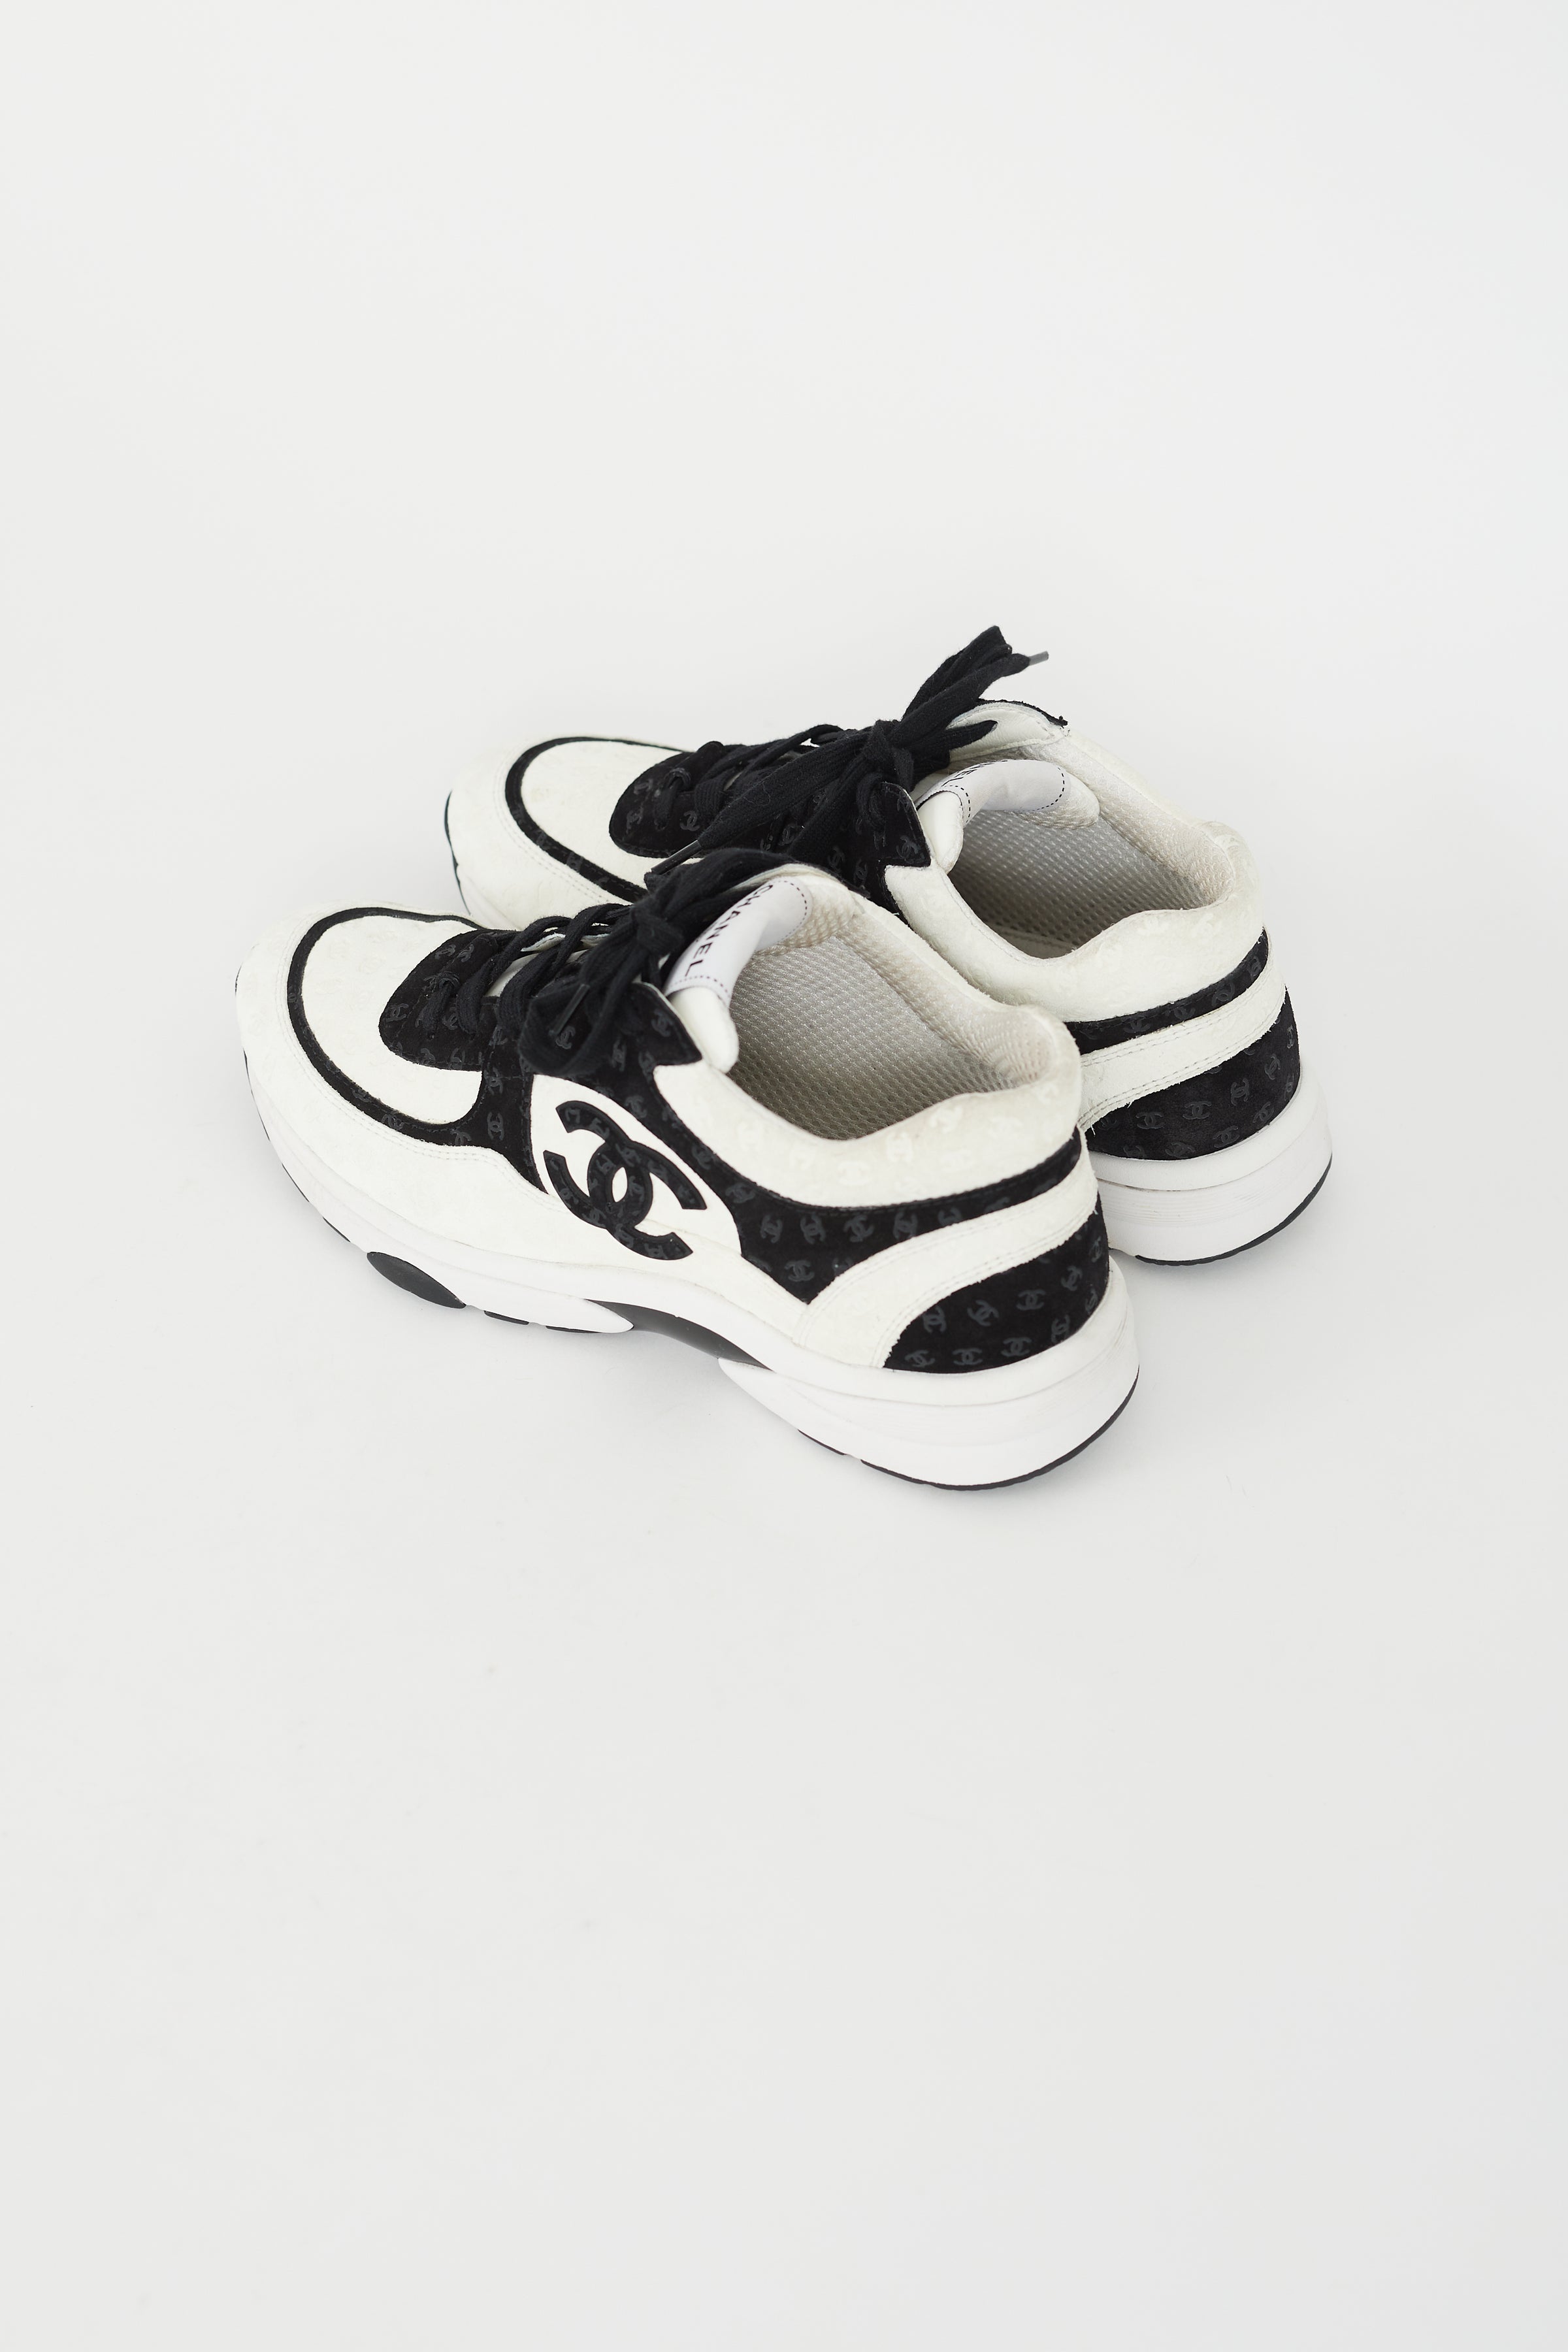 CHANELChanel CC Logo Trainers Sneakers